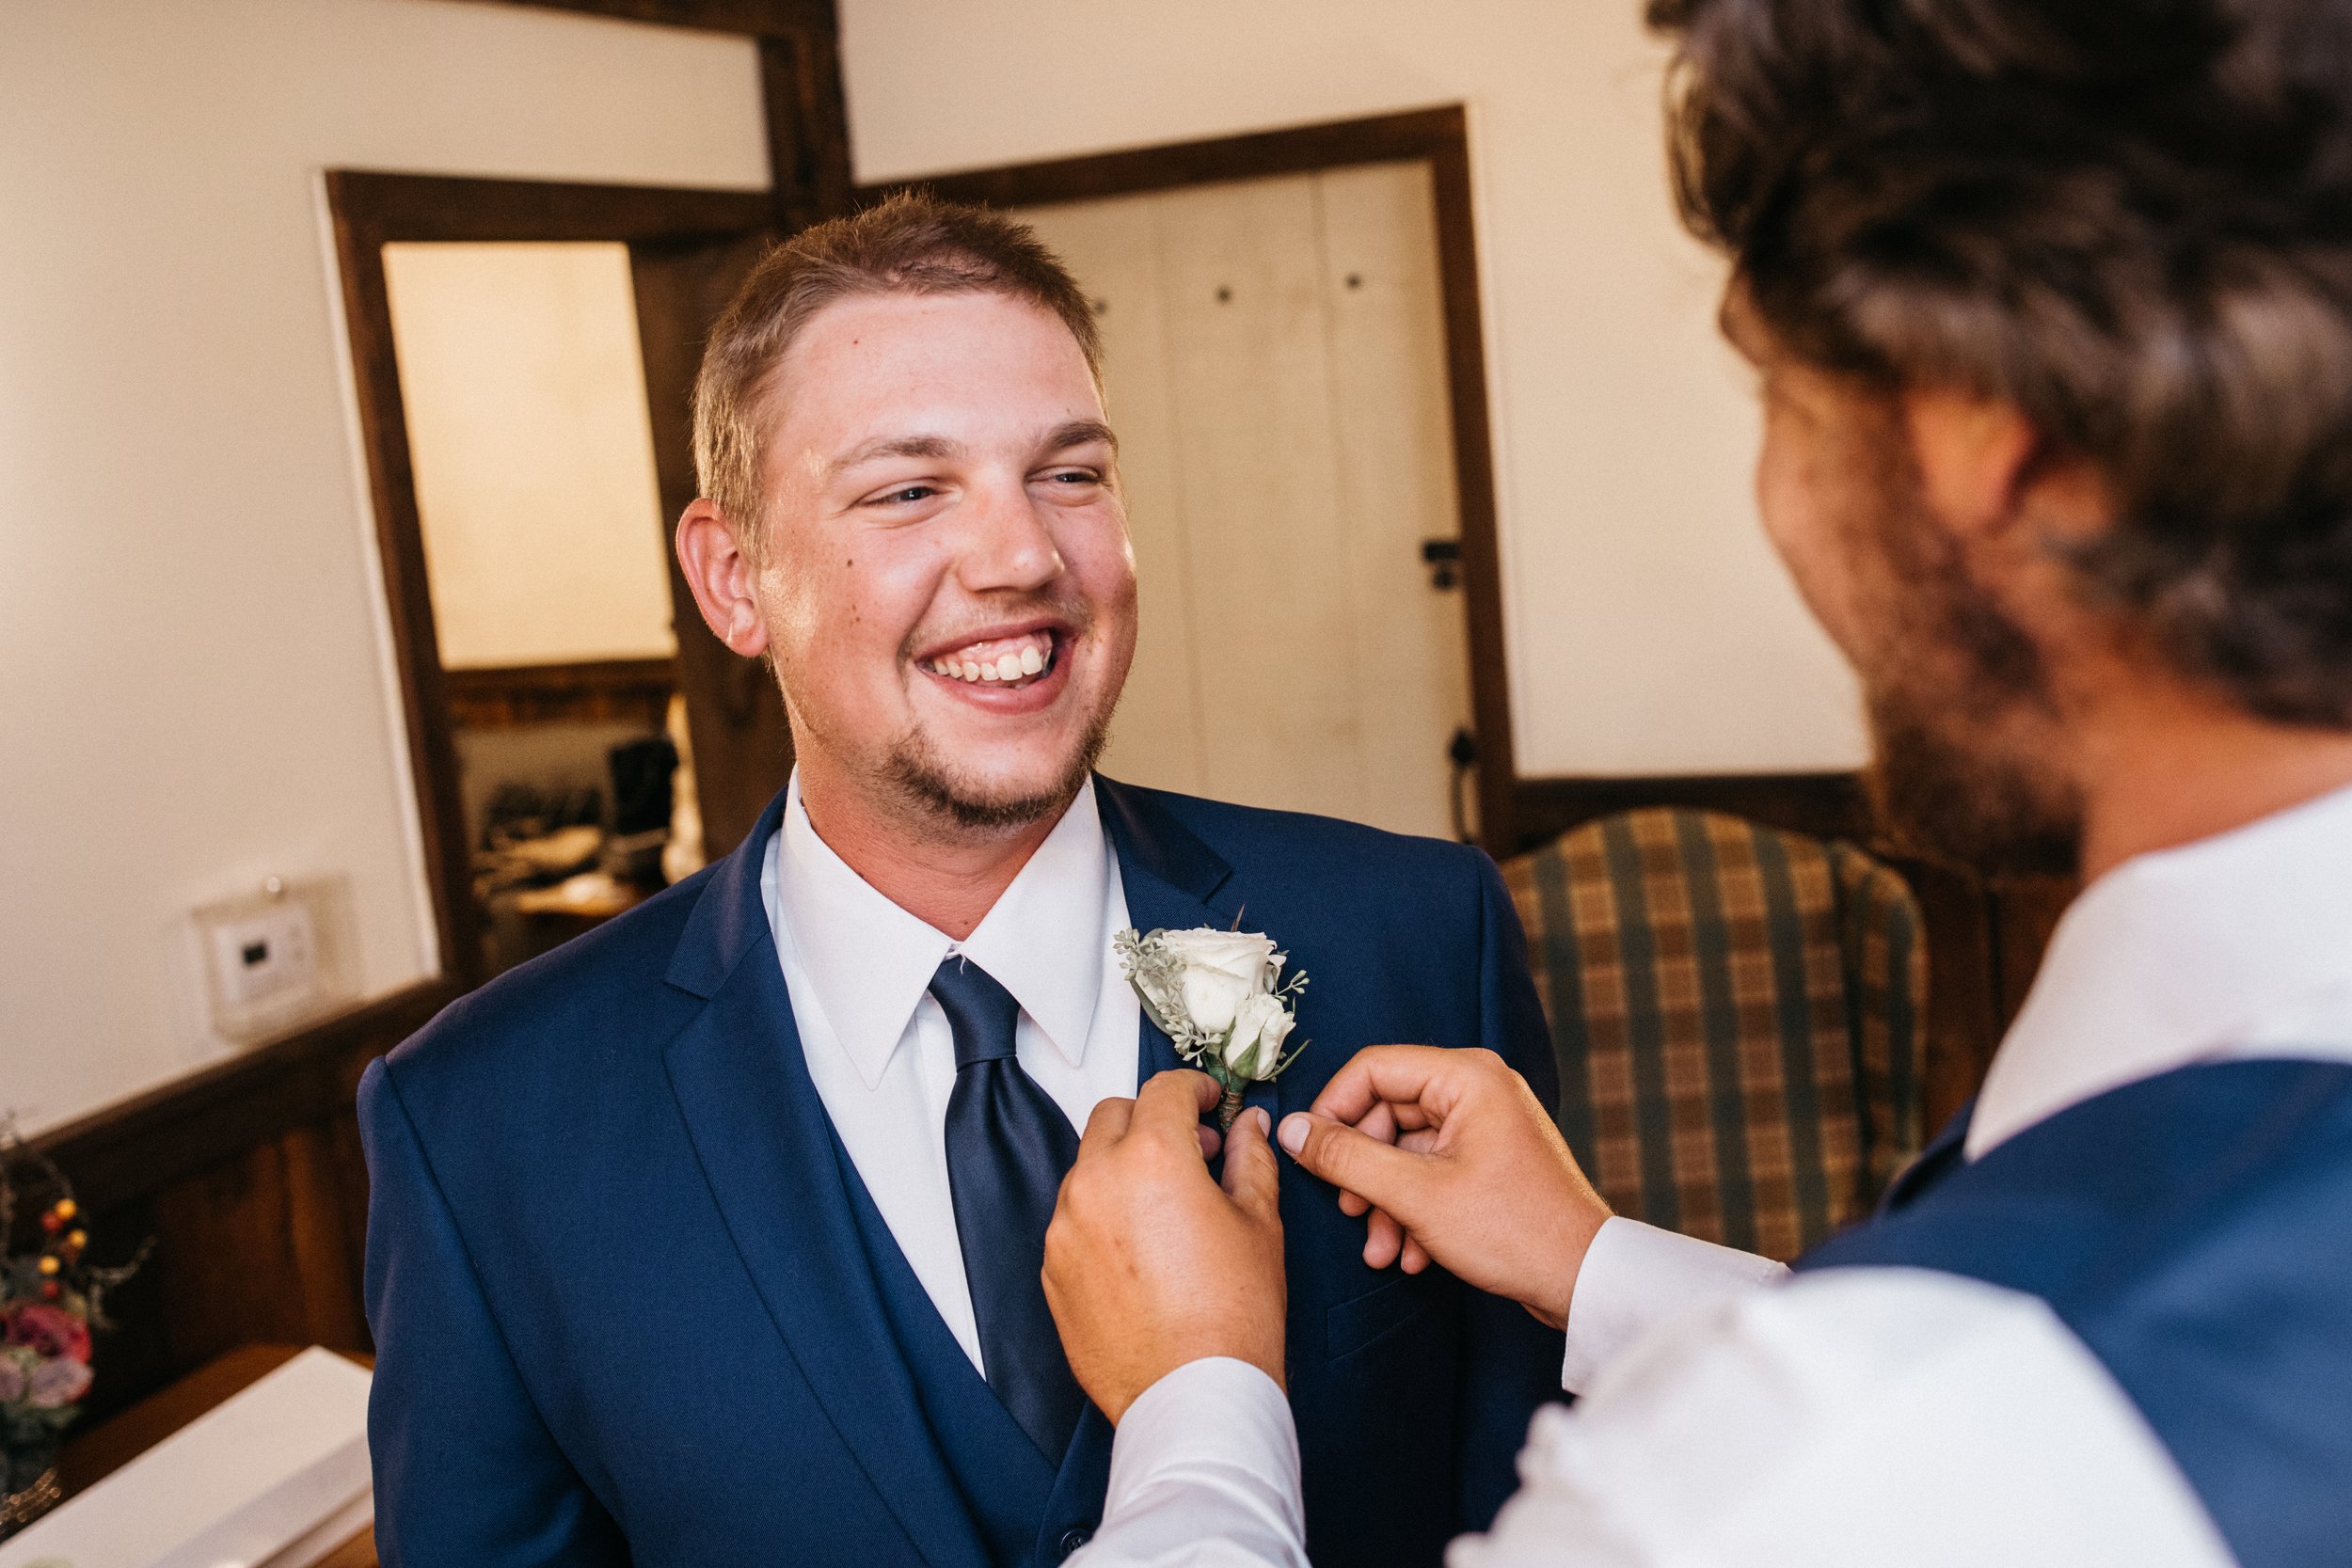 A groomsmen puts a white rose boutonniere on a groom.